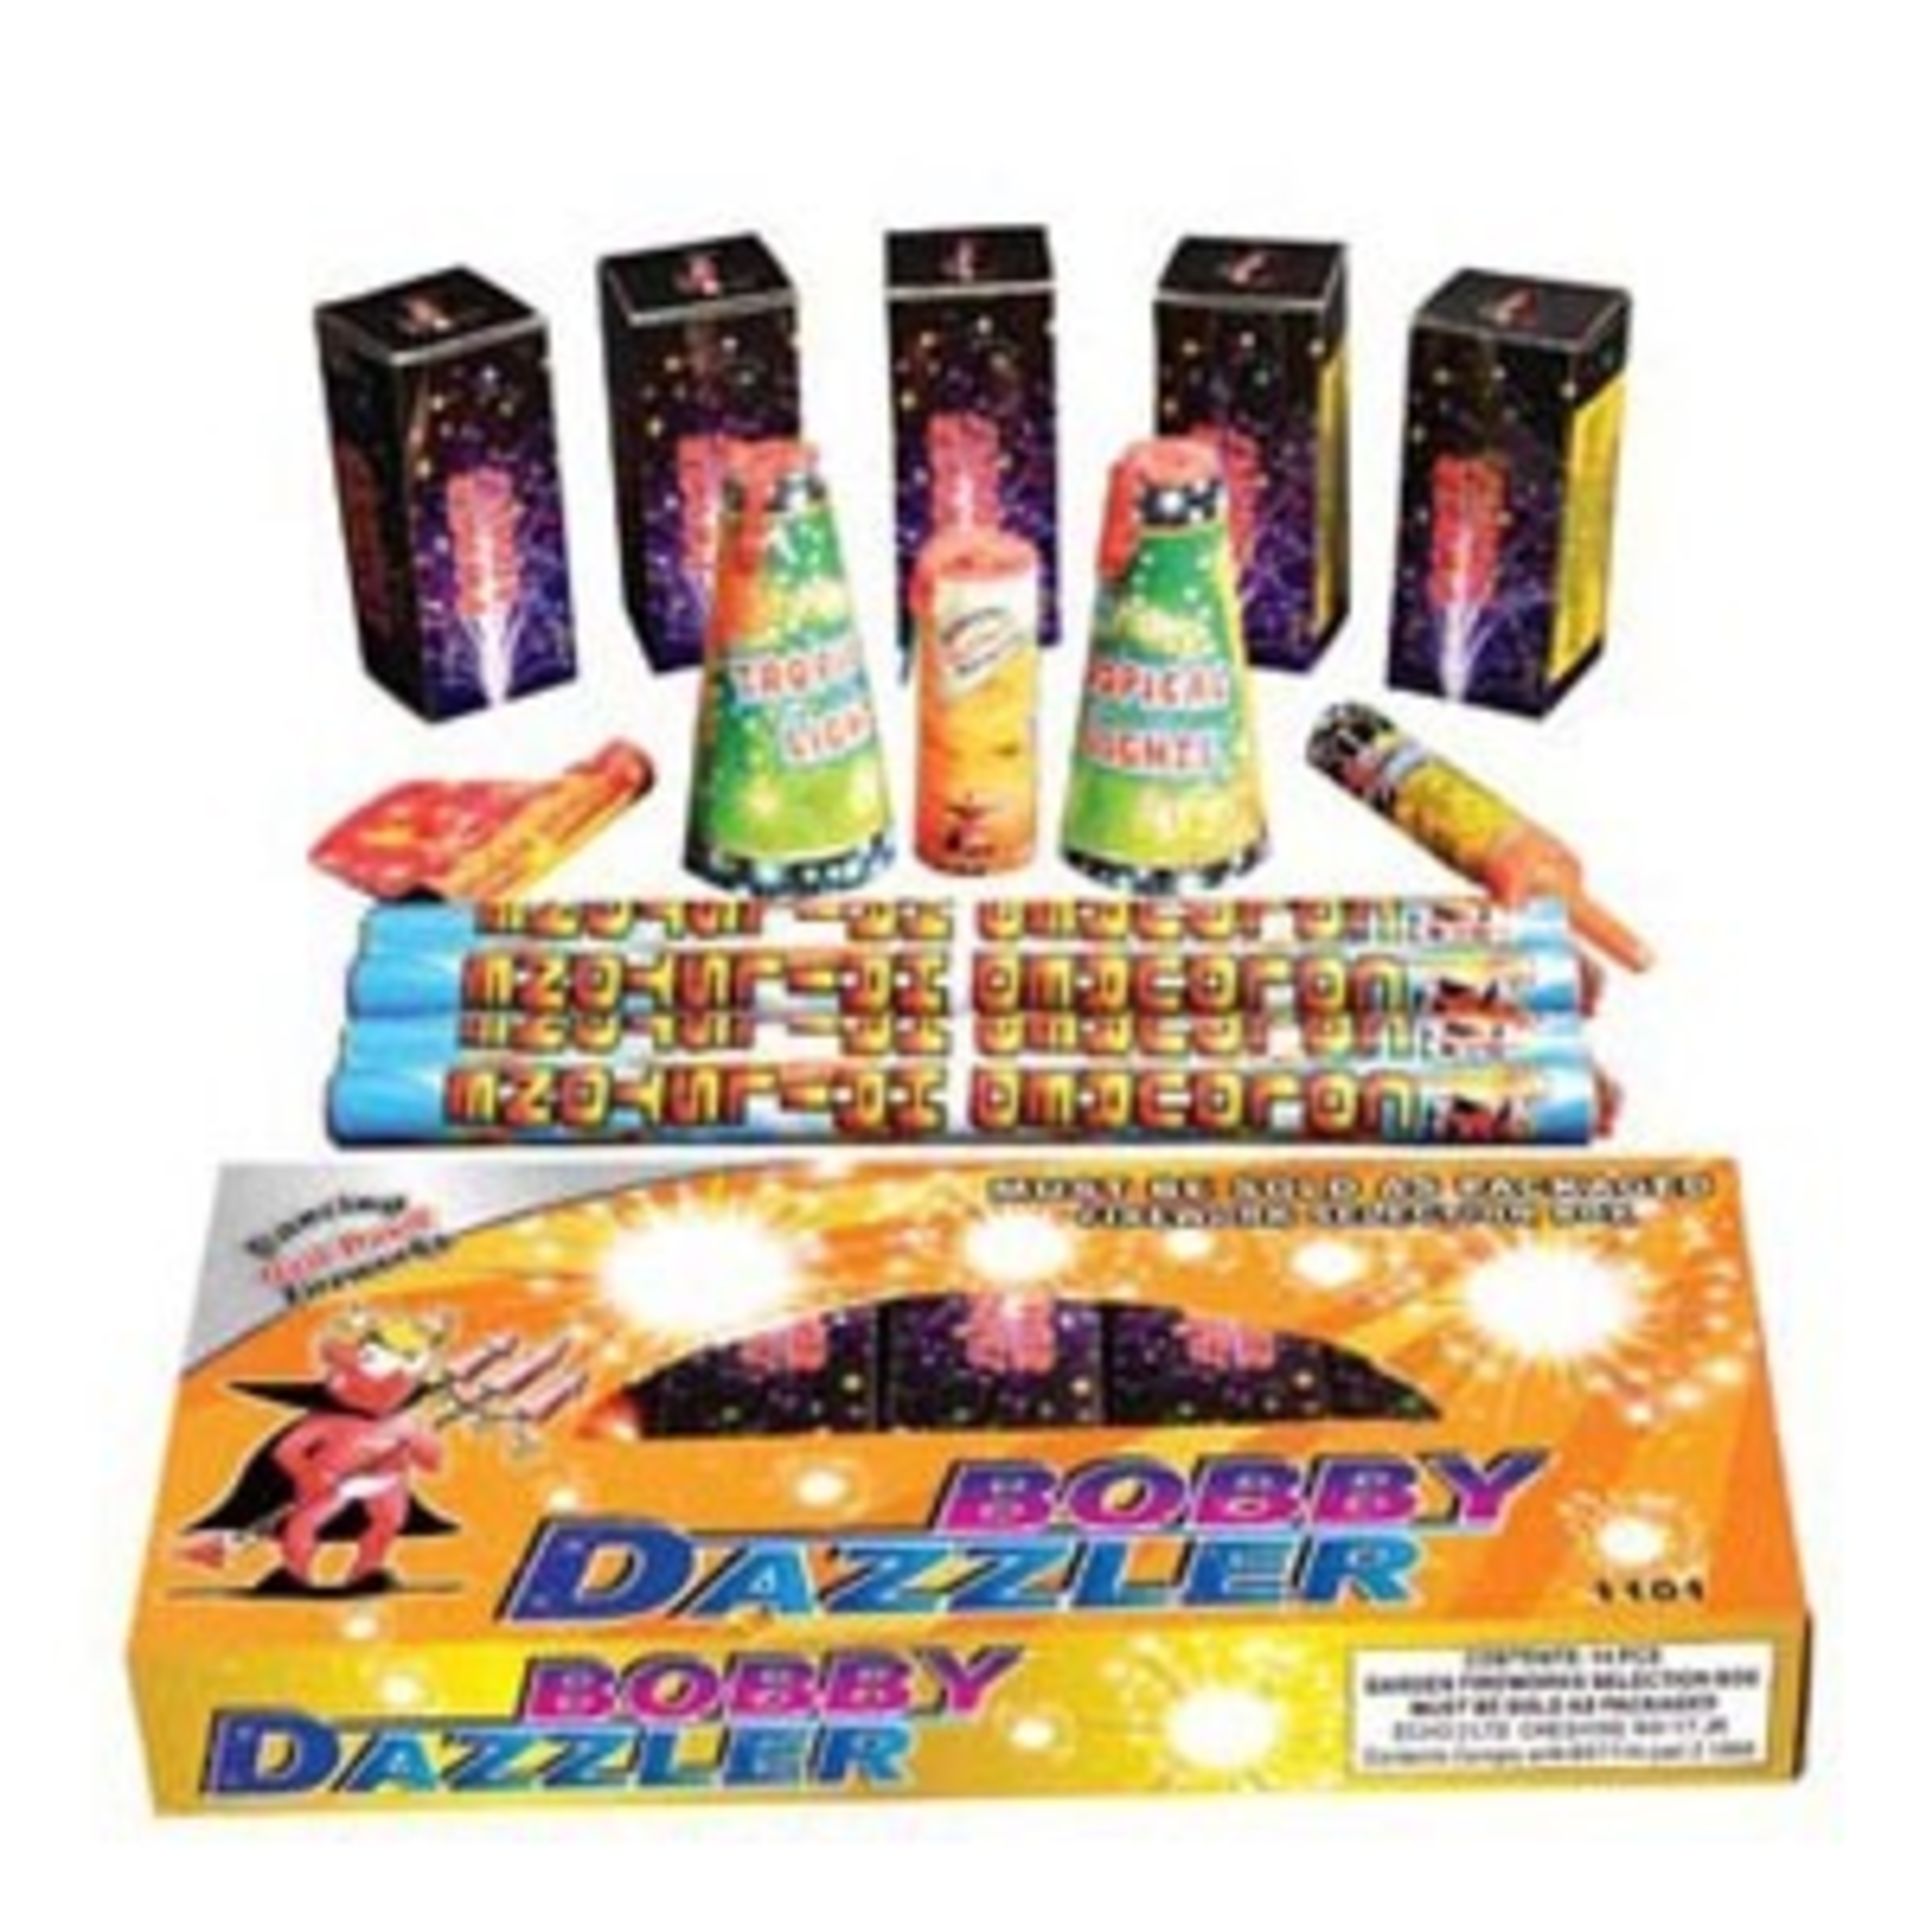 4 x Dancing Red Devil Fireworks - Bobby Dazzler 14 Piece Selection Boxes. Please note: NO DELIVERY